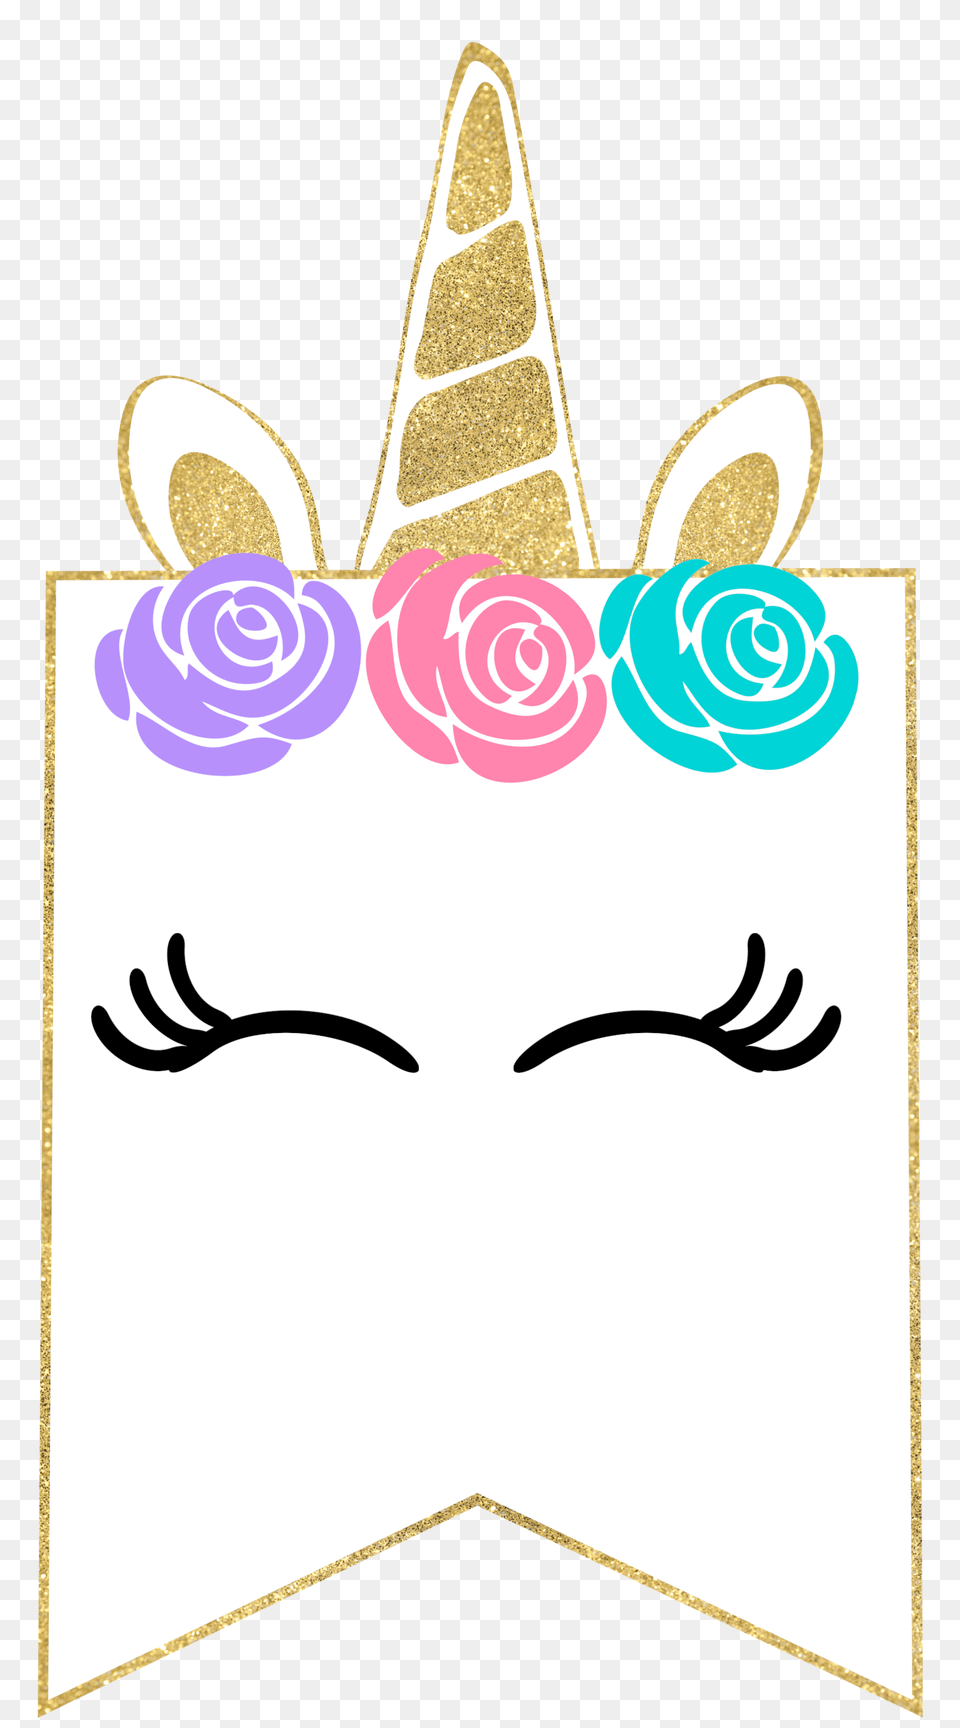 Free Printable Unicorn Decorations Party Banner, Cross, Symbol, Bag, Clothing Png